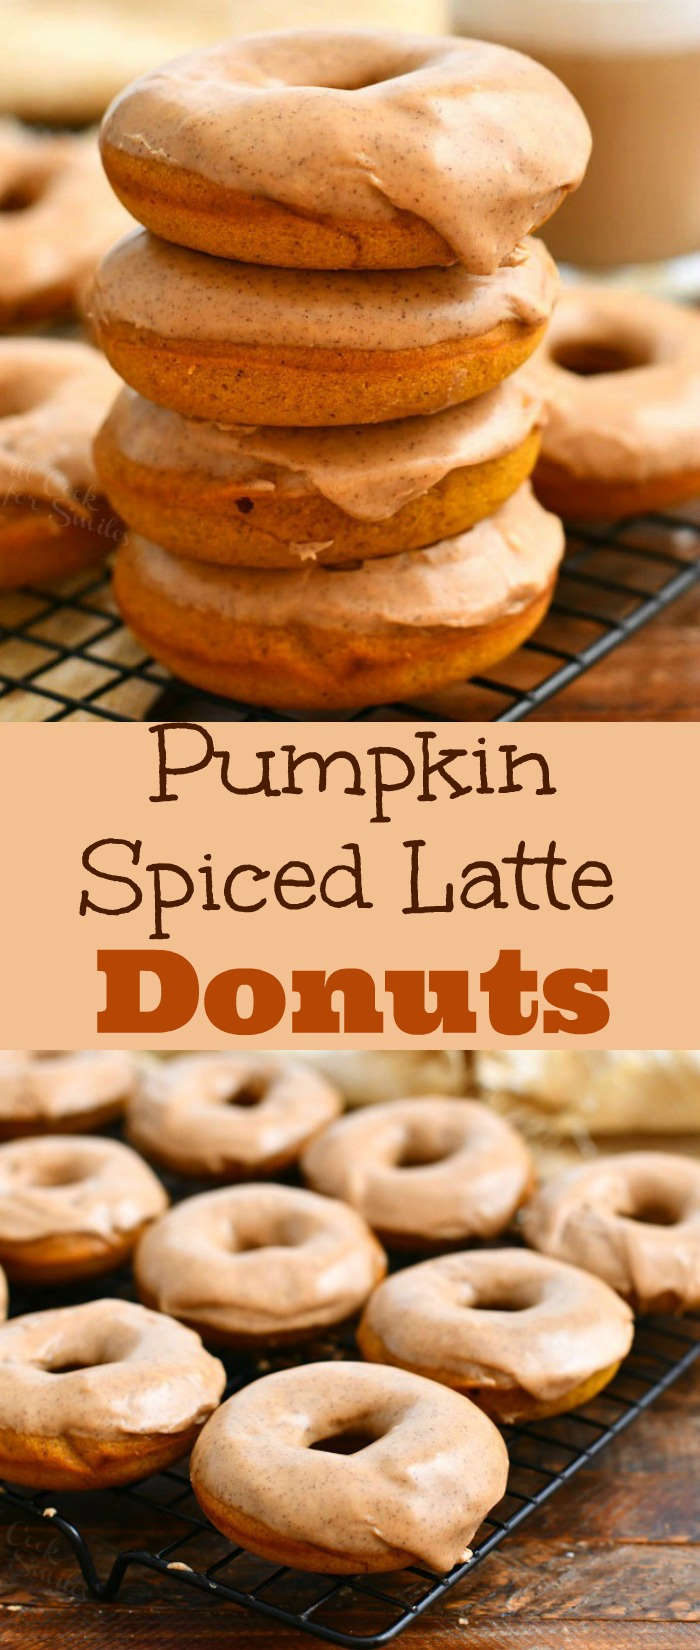 titled photo collage shows a stack of homemade pumpkin spiced latte donuts